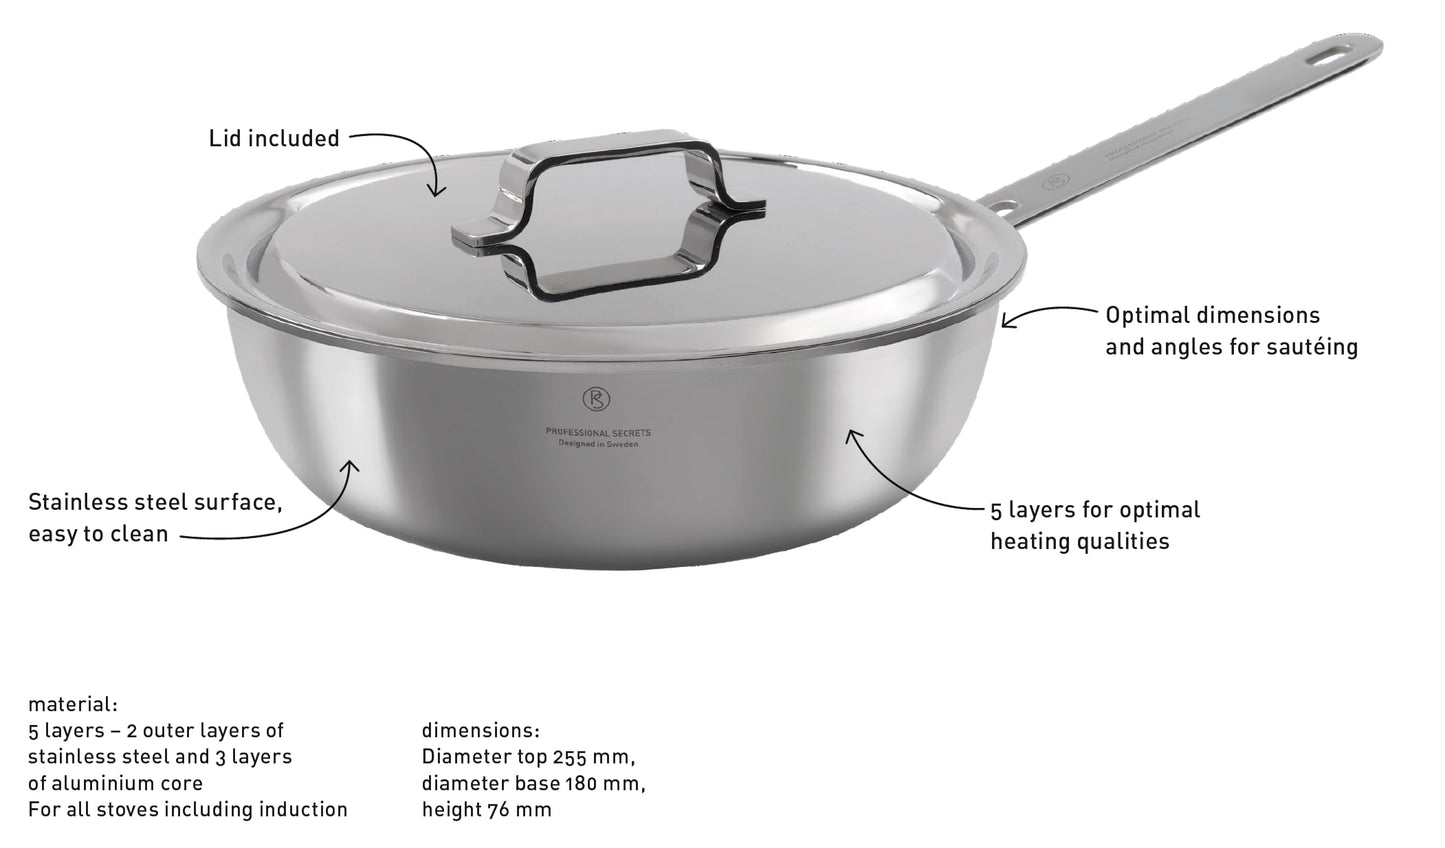 Sauteuse - the French wok, 3 liters